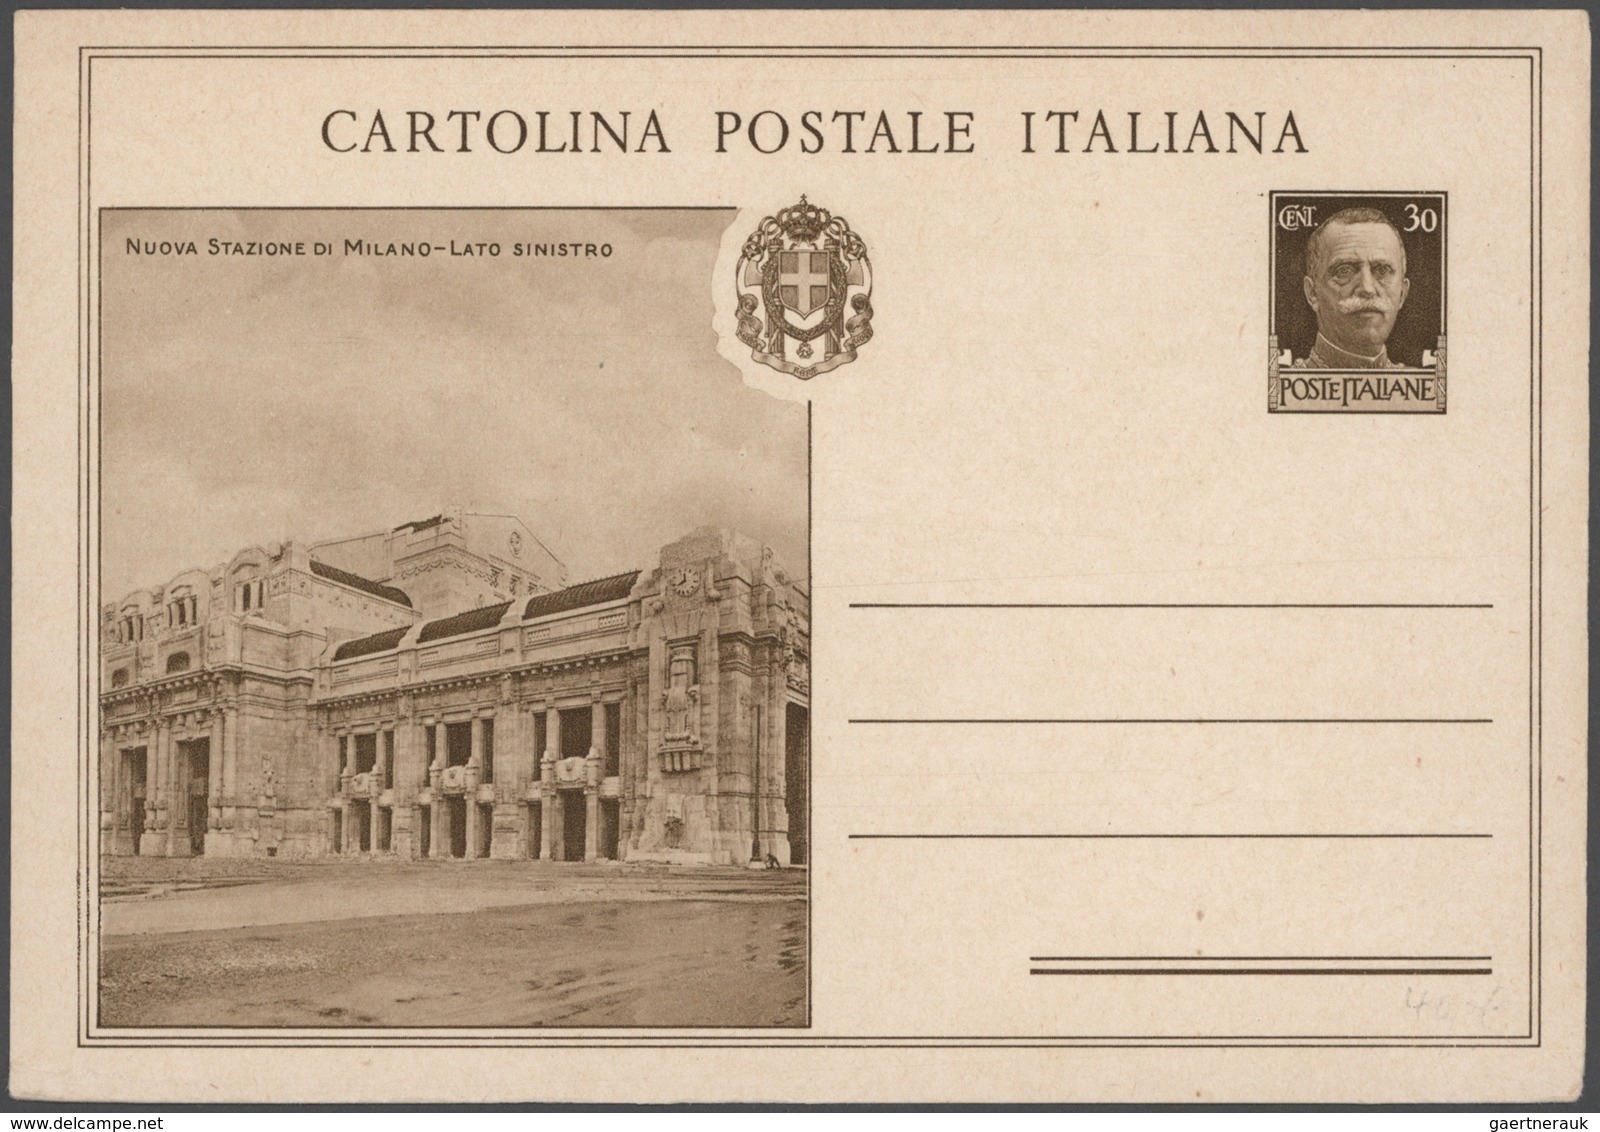 Italien: 1873/1997 accumulation of ca. 430 unused/CTO-used and used postal stationeries (picture pos